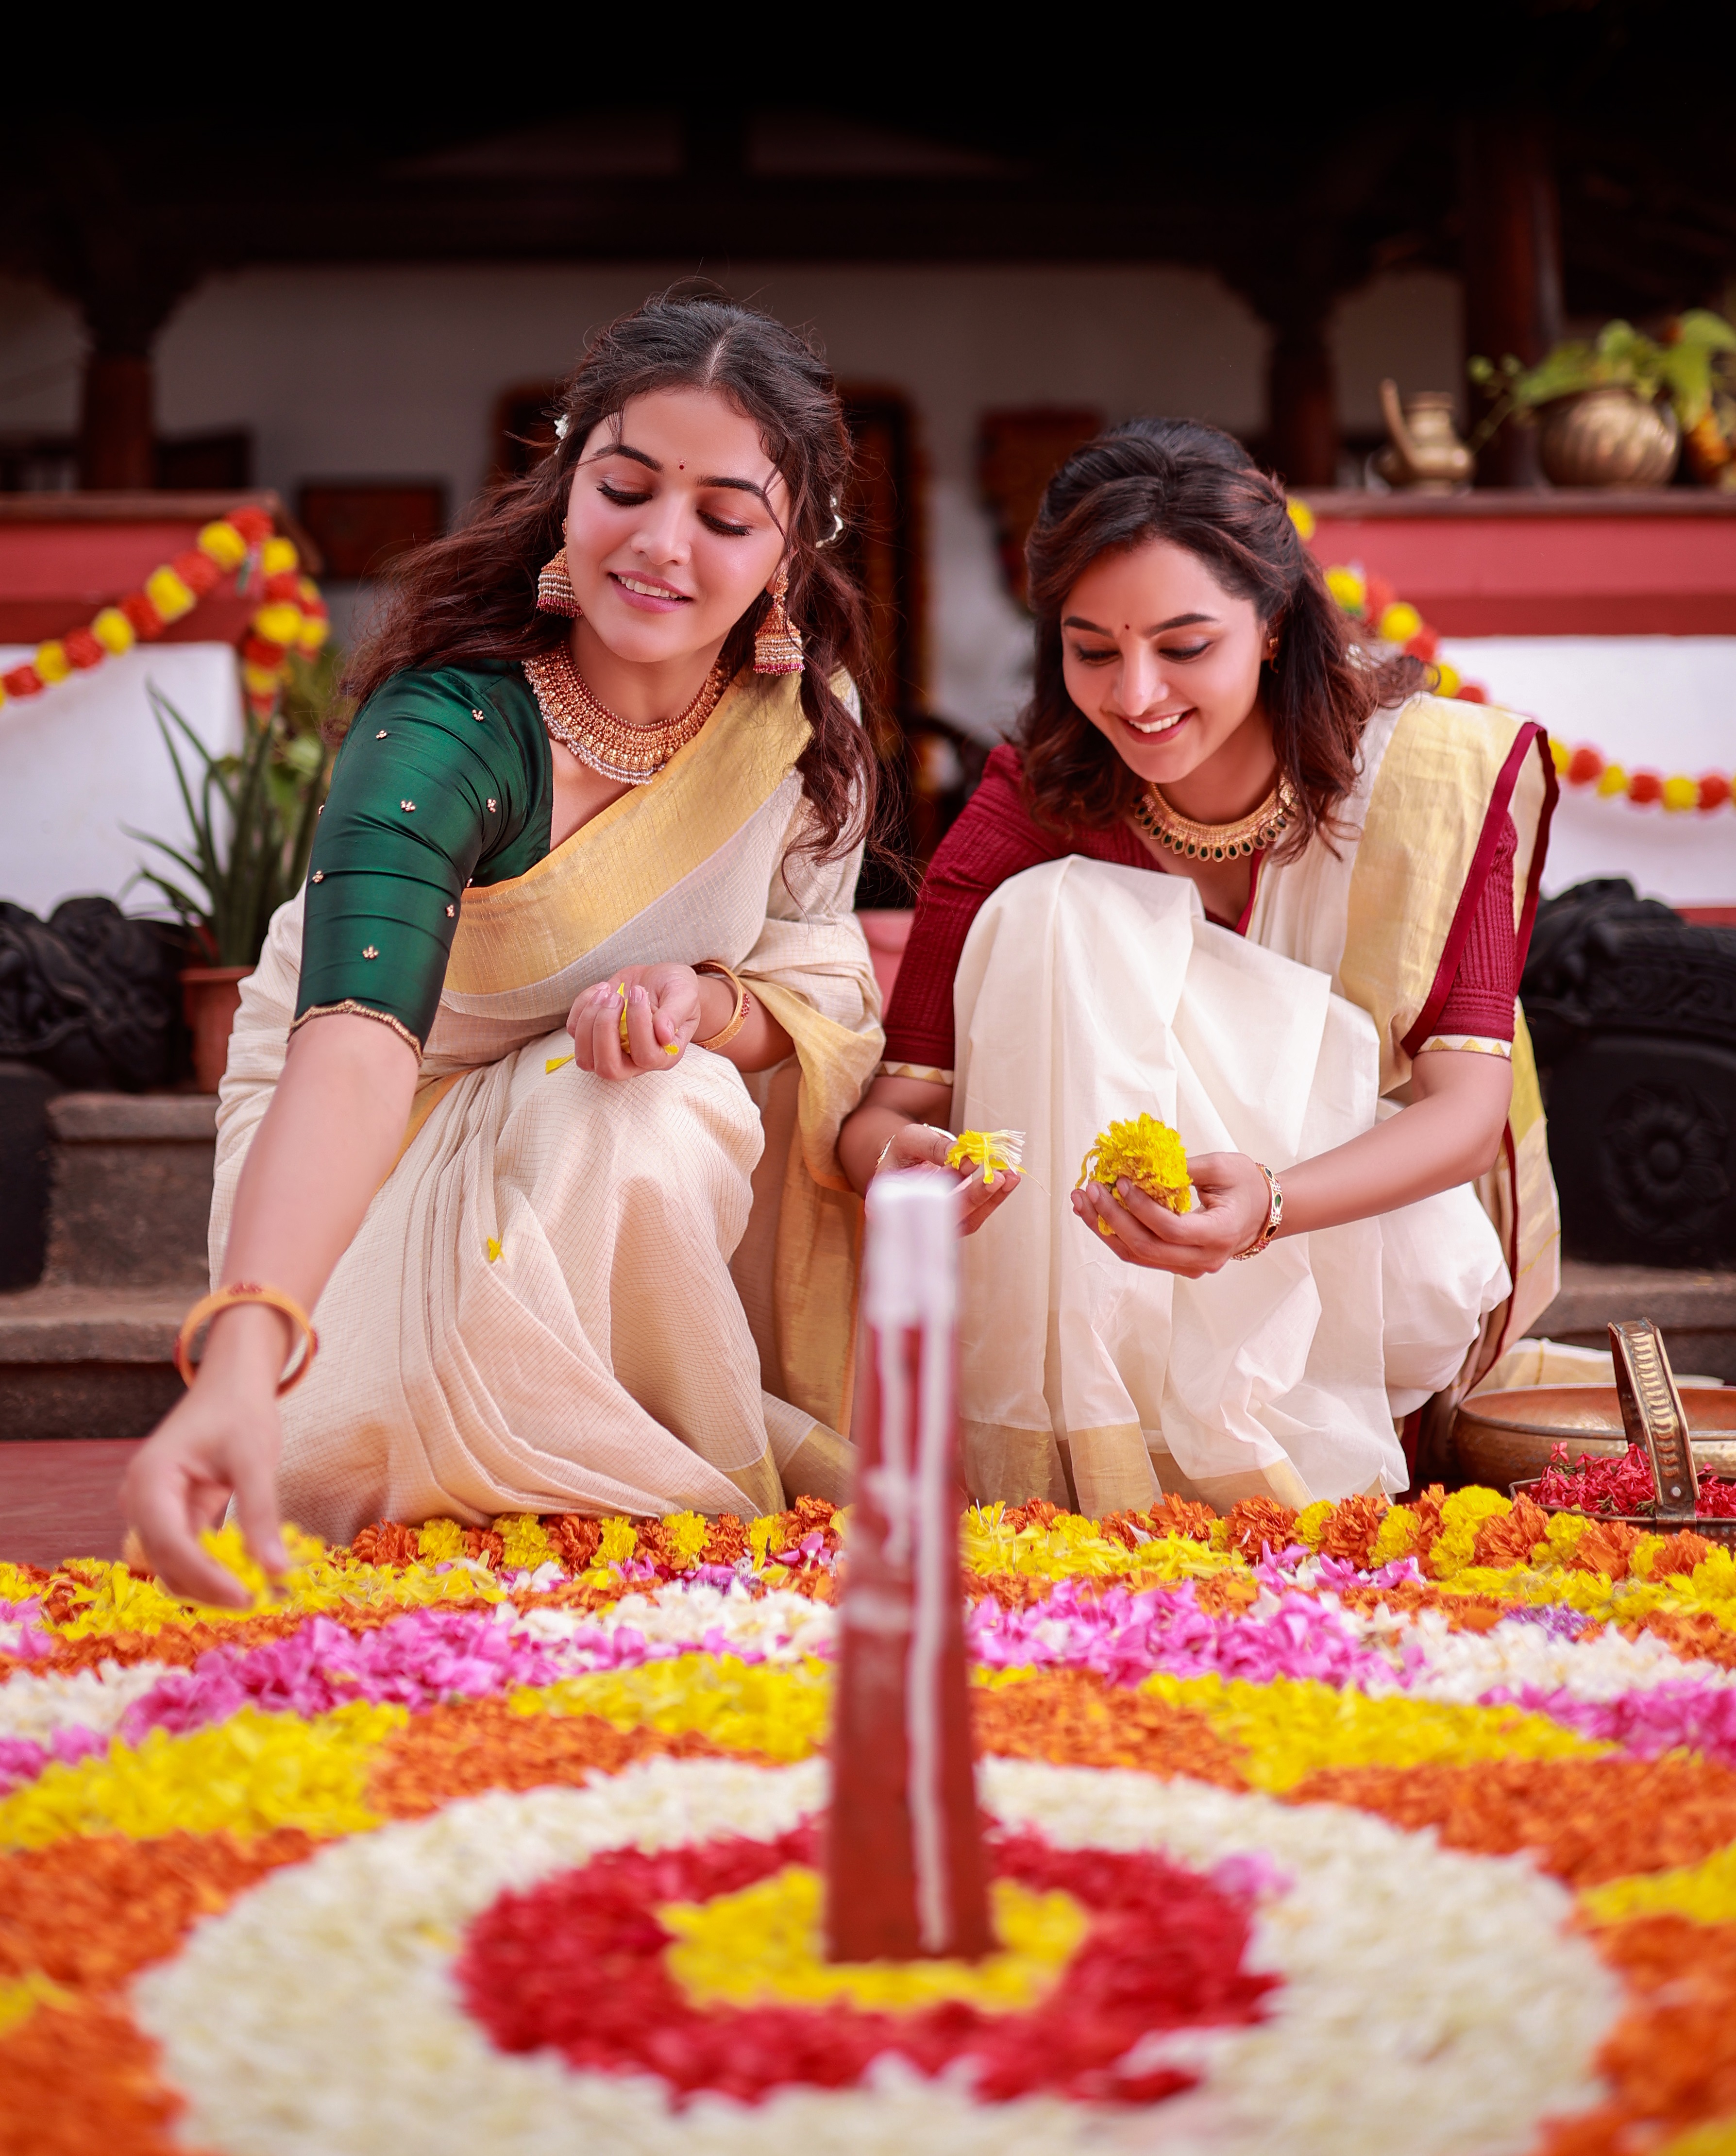 Kalyan Jewellers brings in festive cheer with the launch of its Onam 2022 Digital Campaign